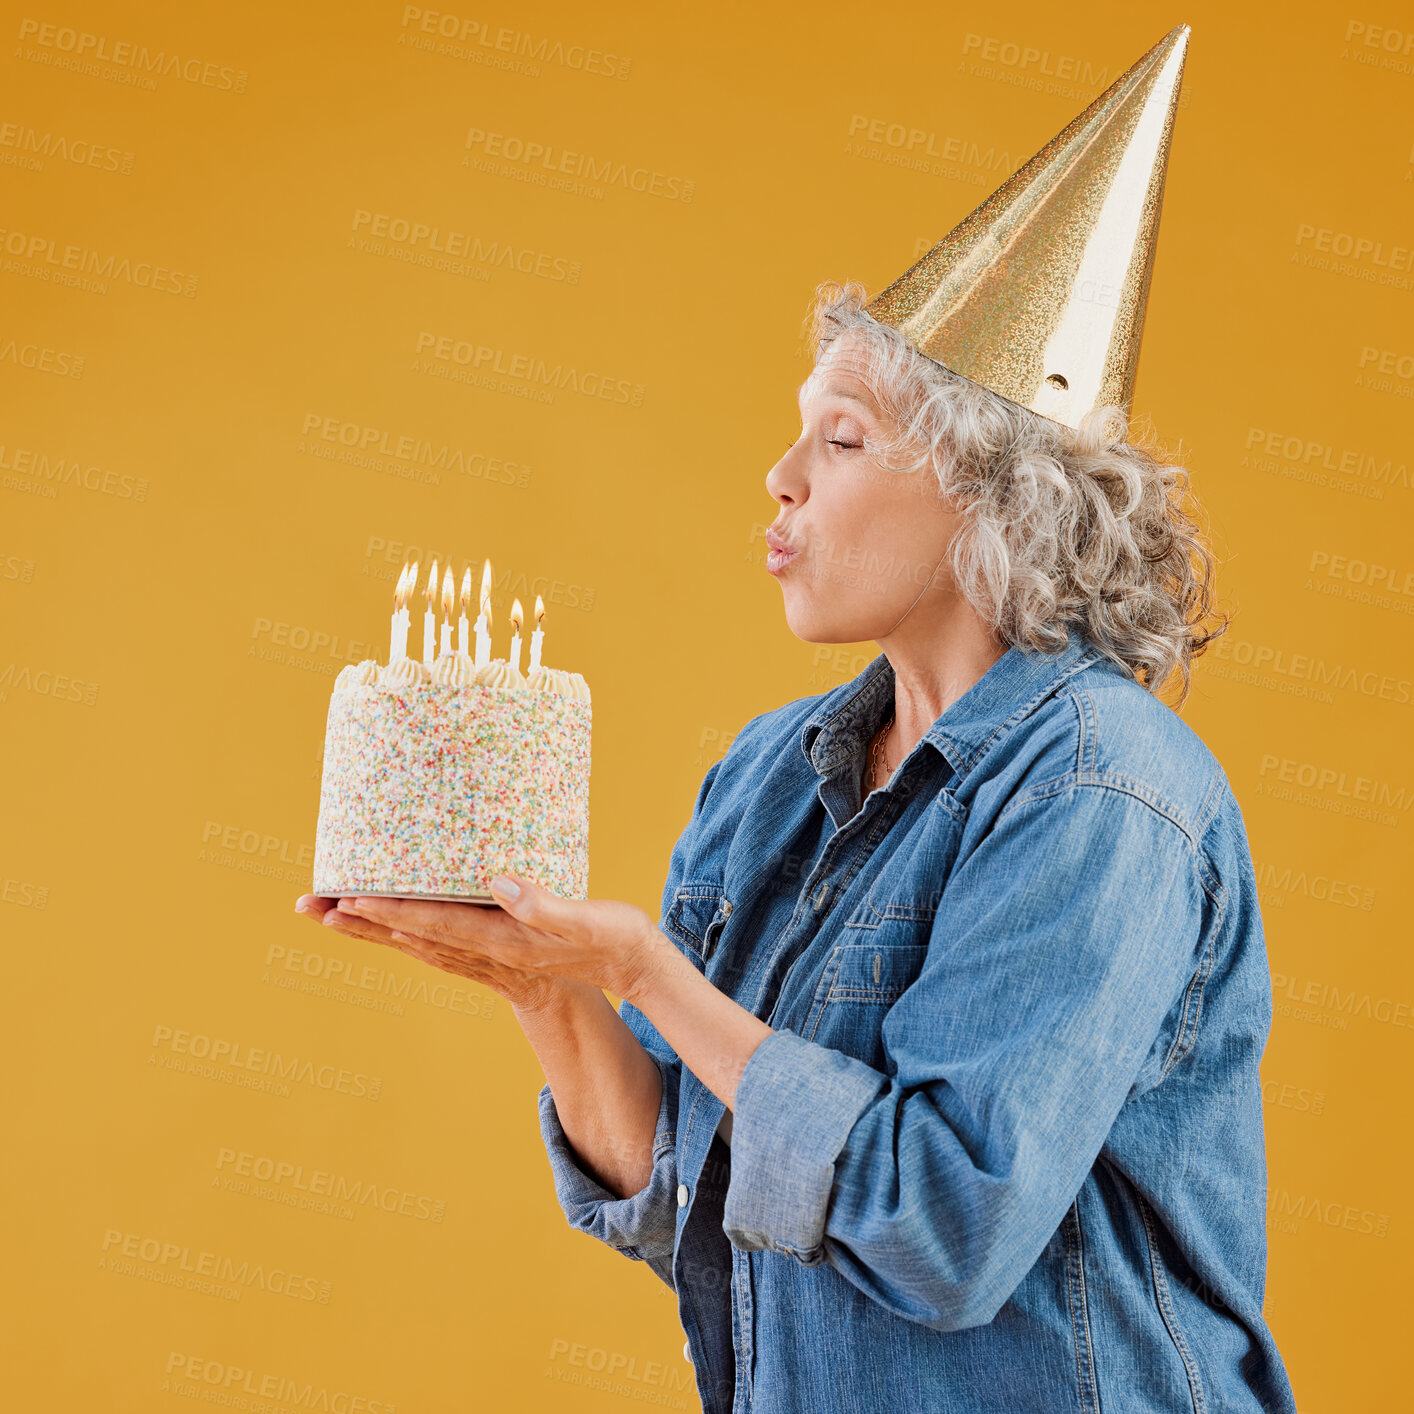 Buy stock photo One happy mature caucasian woman blowing out candles on a cake she is holding while wearing a birthday hat against a yellow background in the studio. Smiling white lady celebrating and making a wish